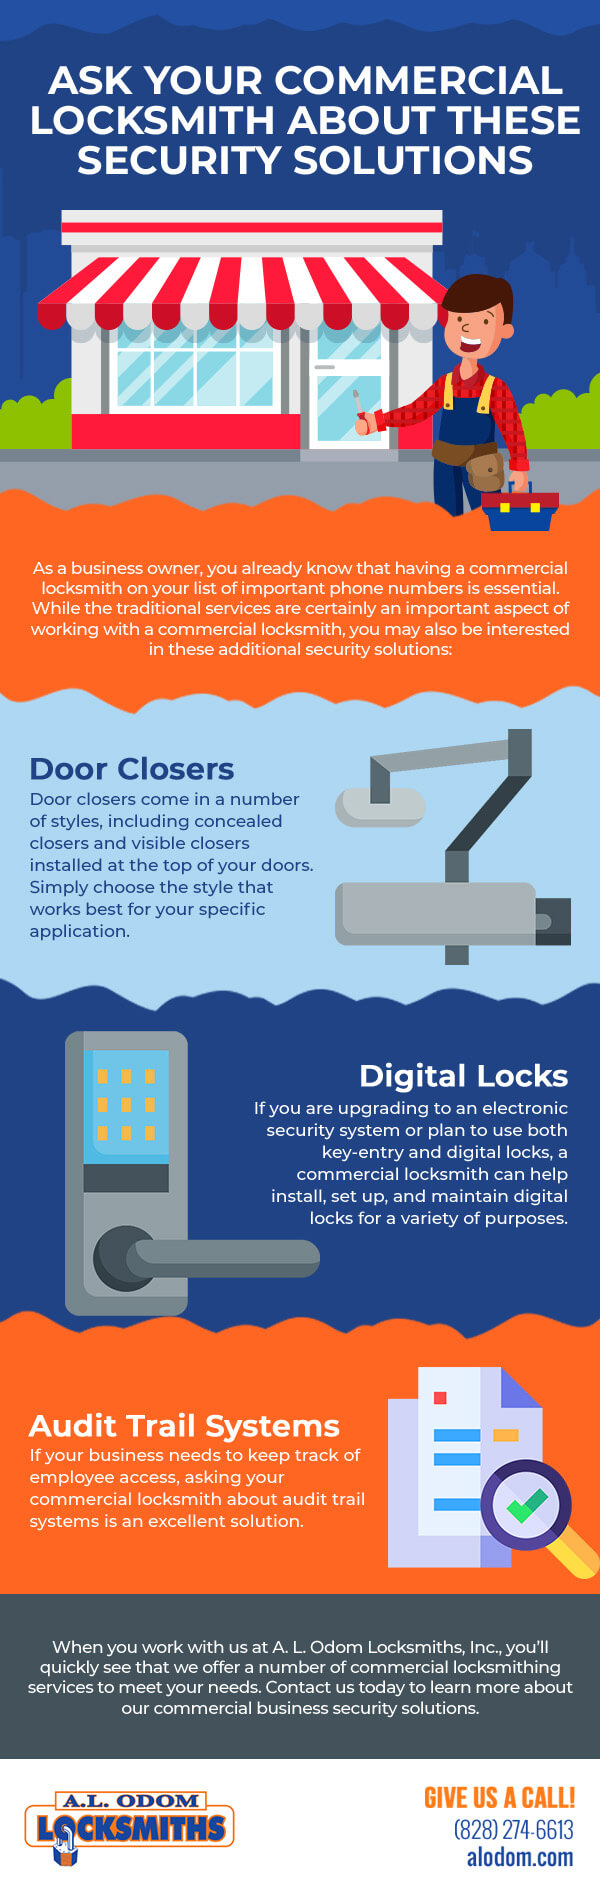 Ask Your Commercial Locksmith About These Security Solutions